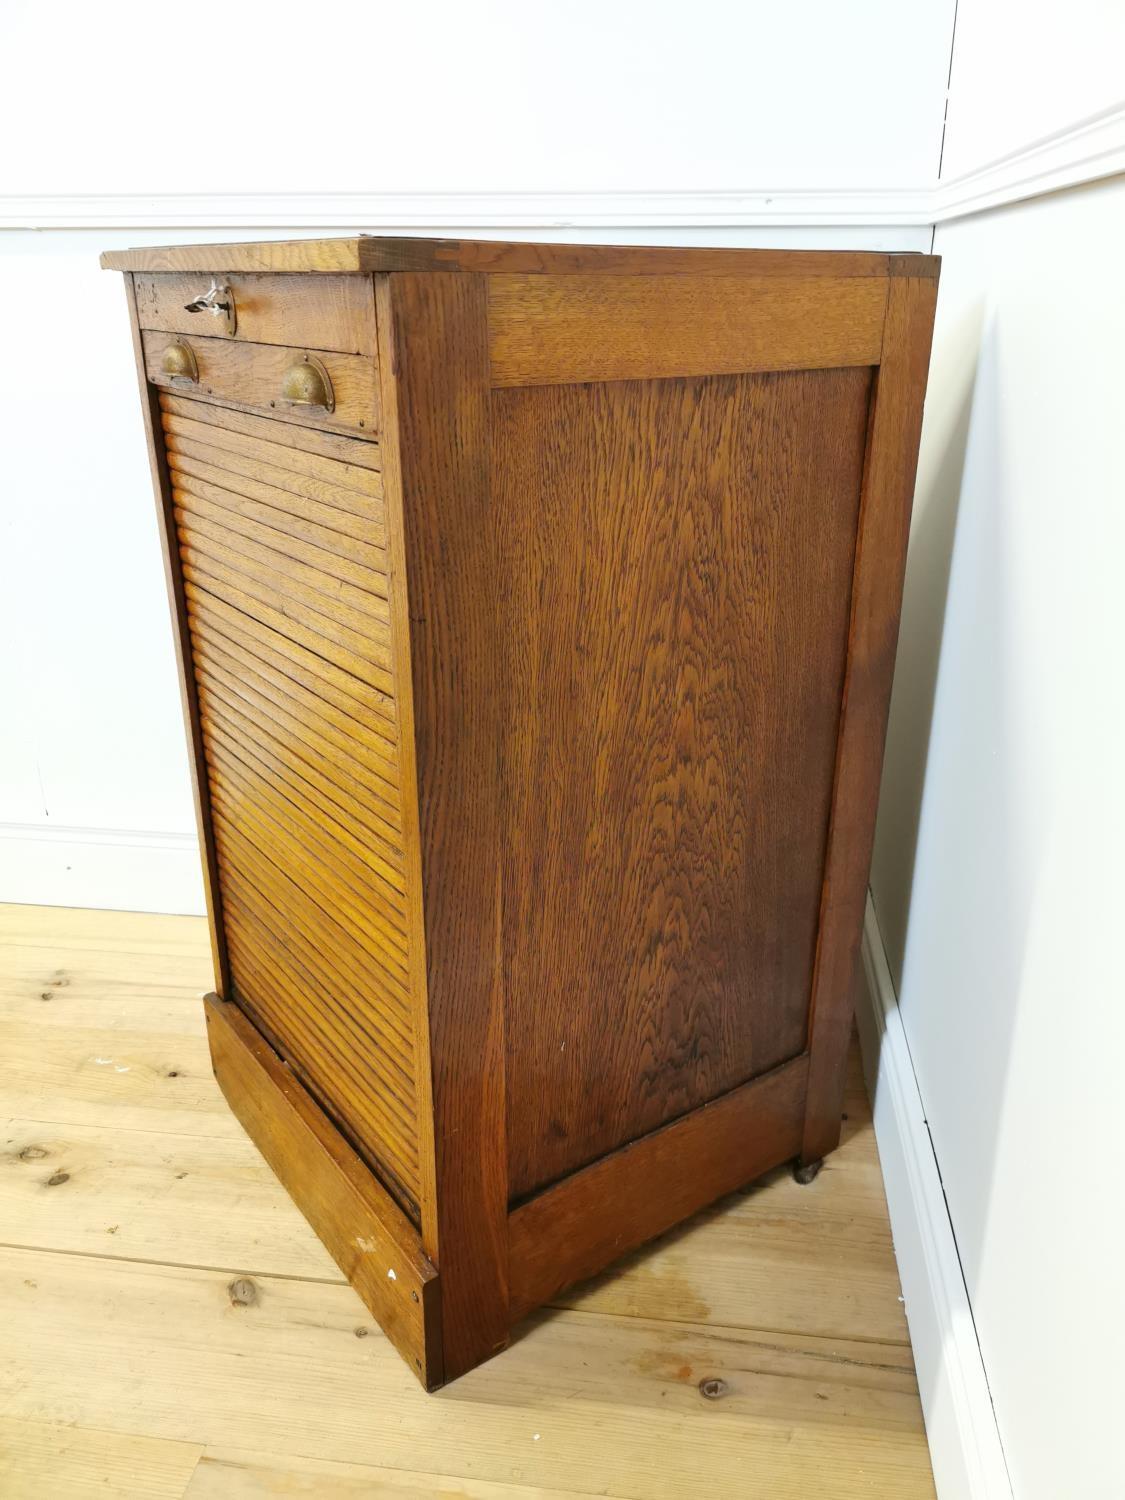 Early 20th. C. oak office cabinet with tambour door - Image 3 of 5